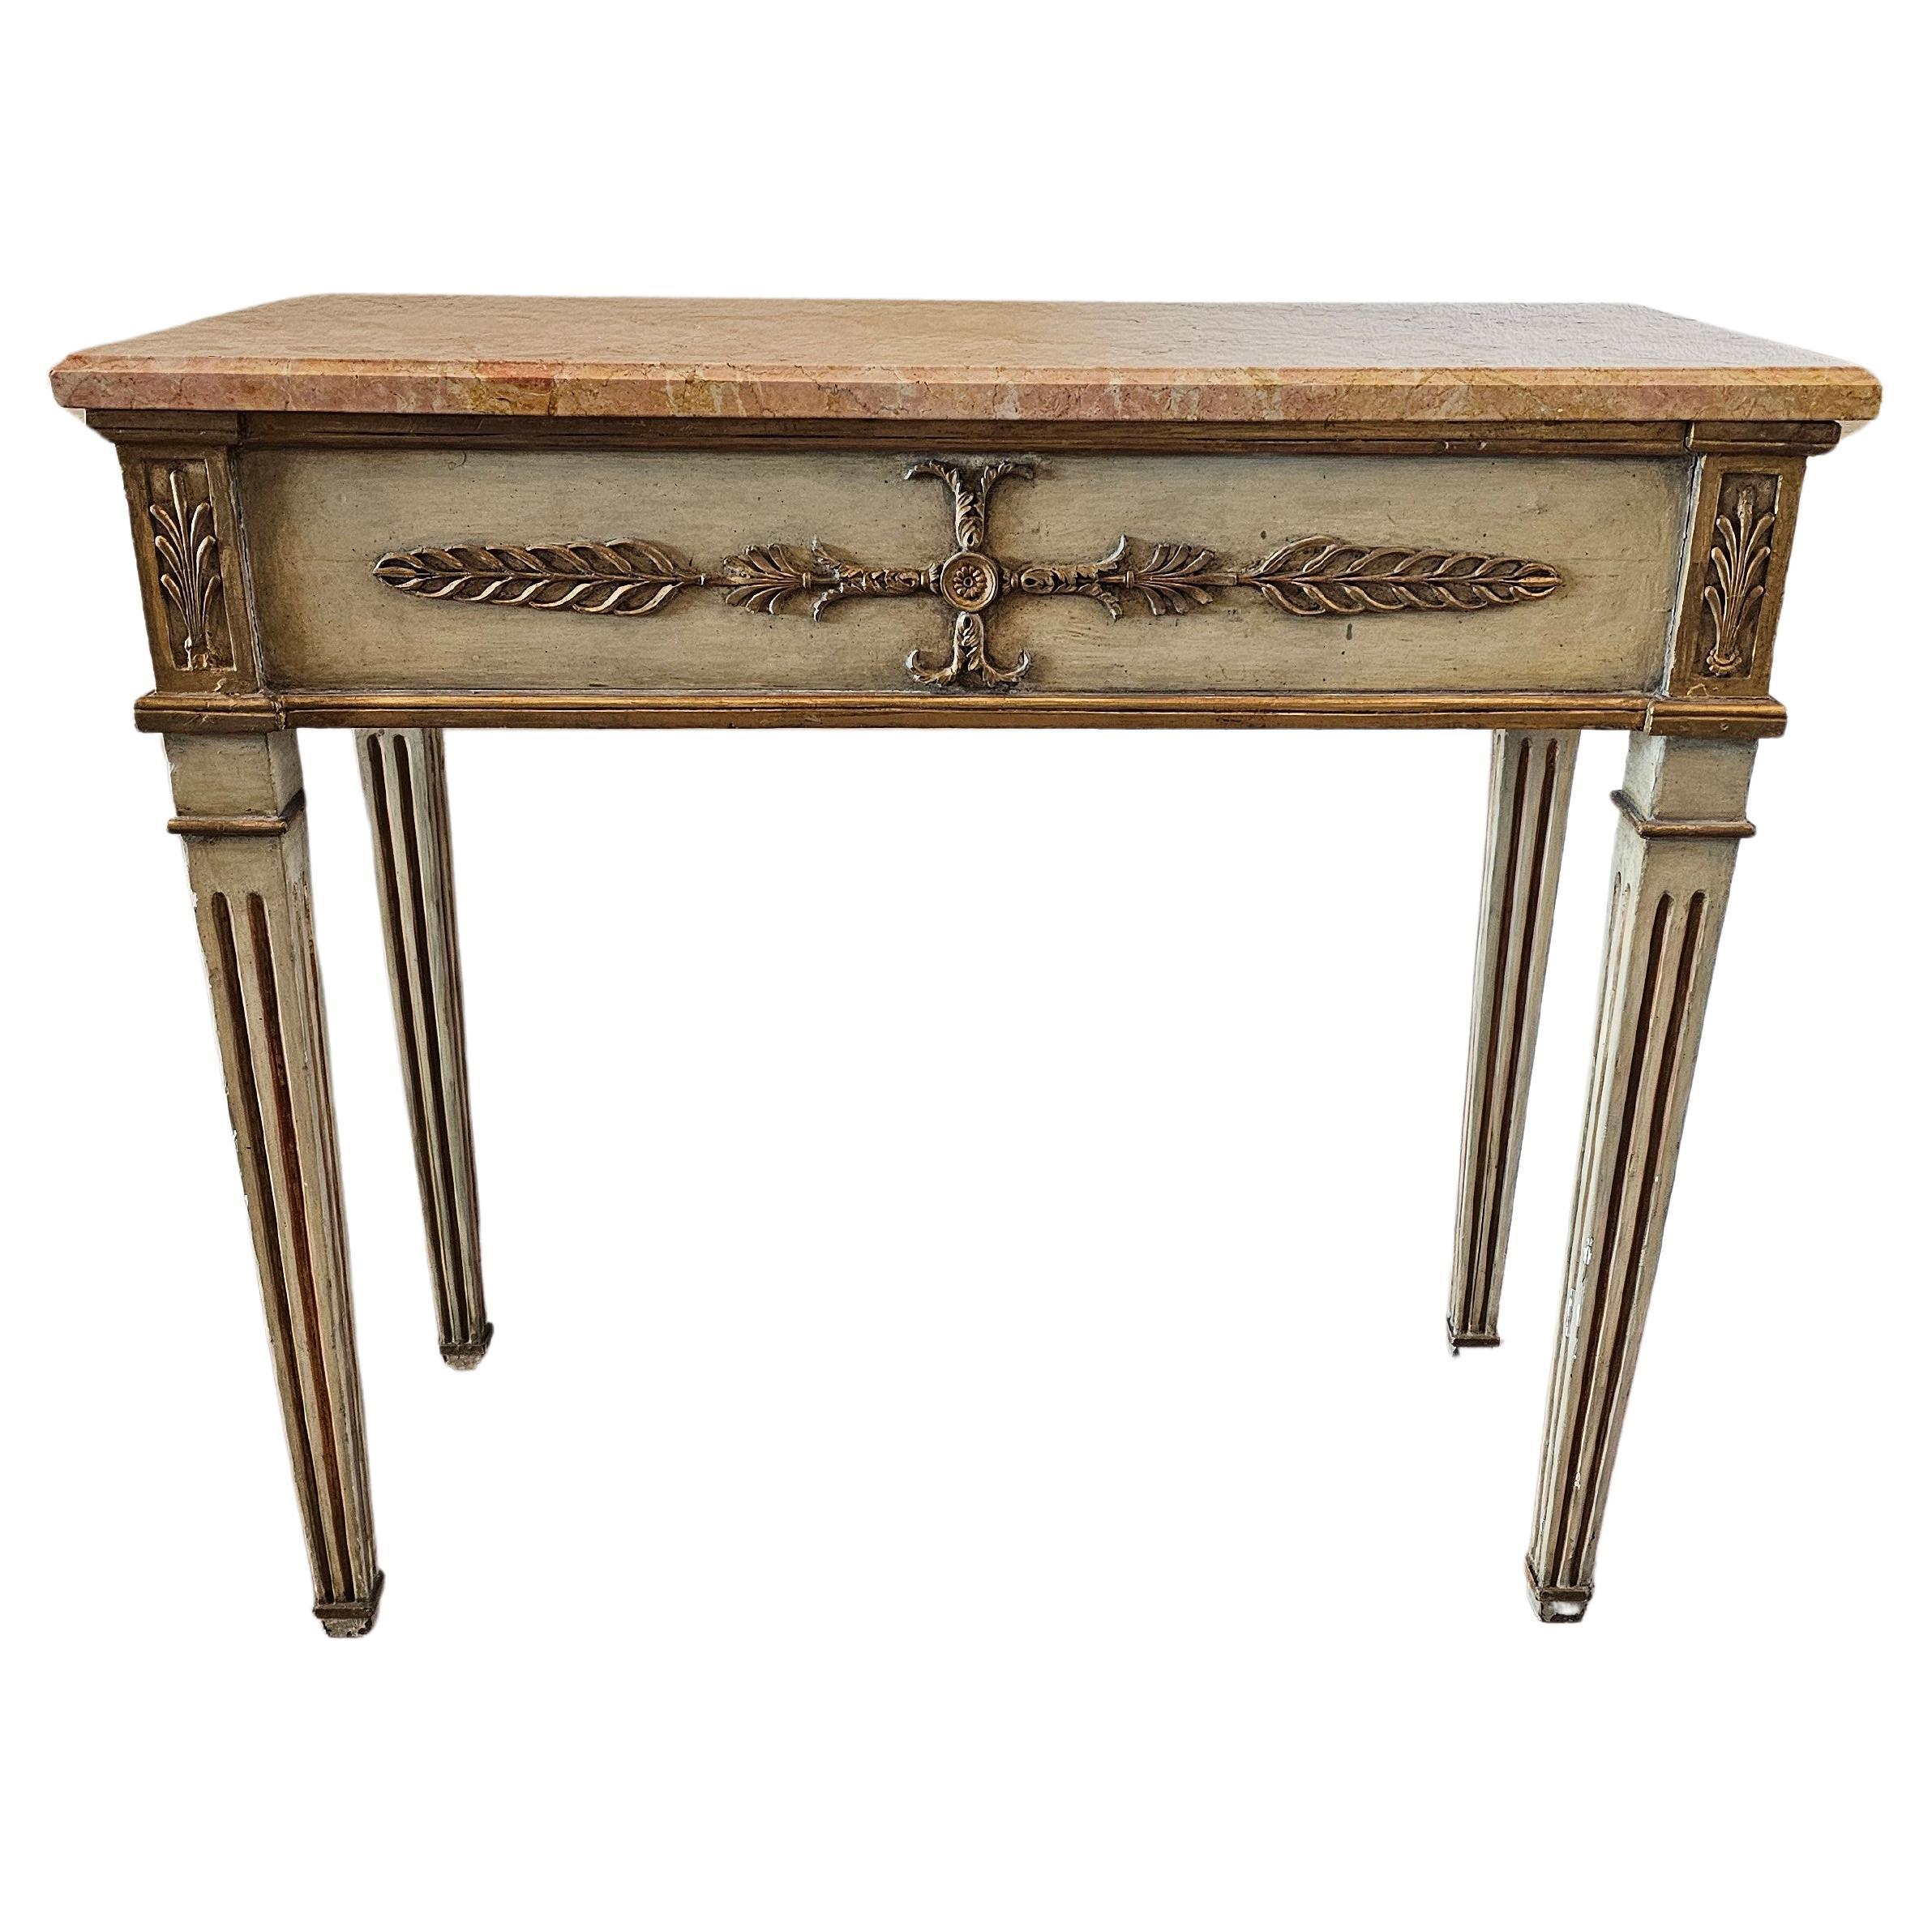 Antique Swedish Gustavian Neoclassical Painted Wooden Console Table  For Sale